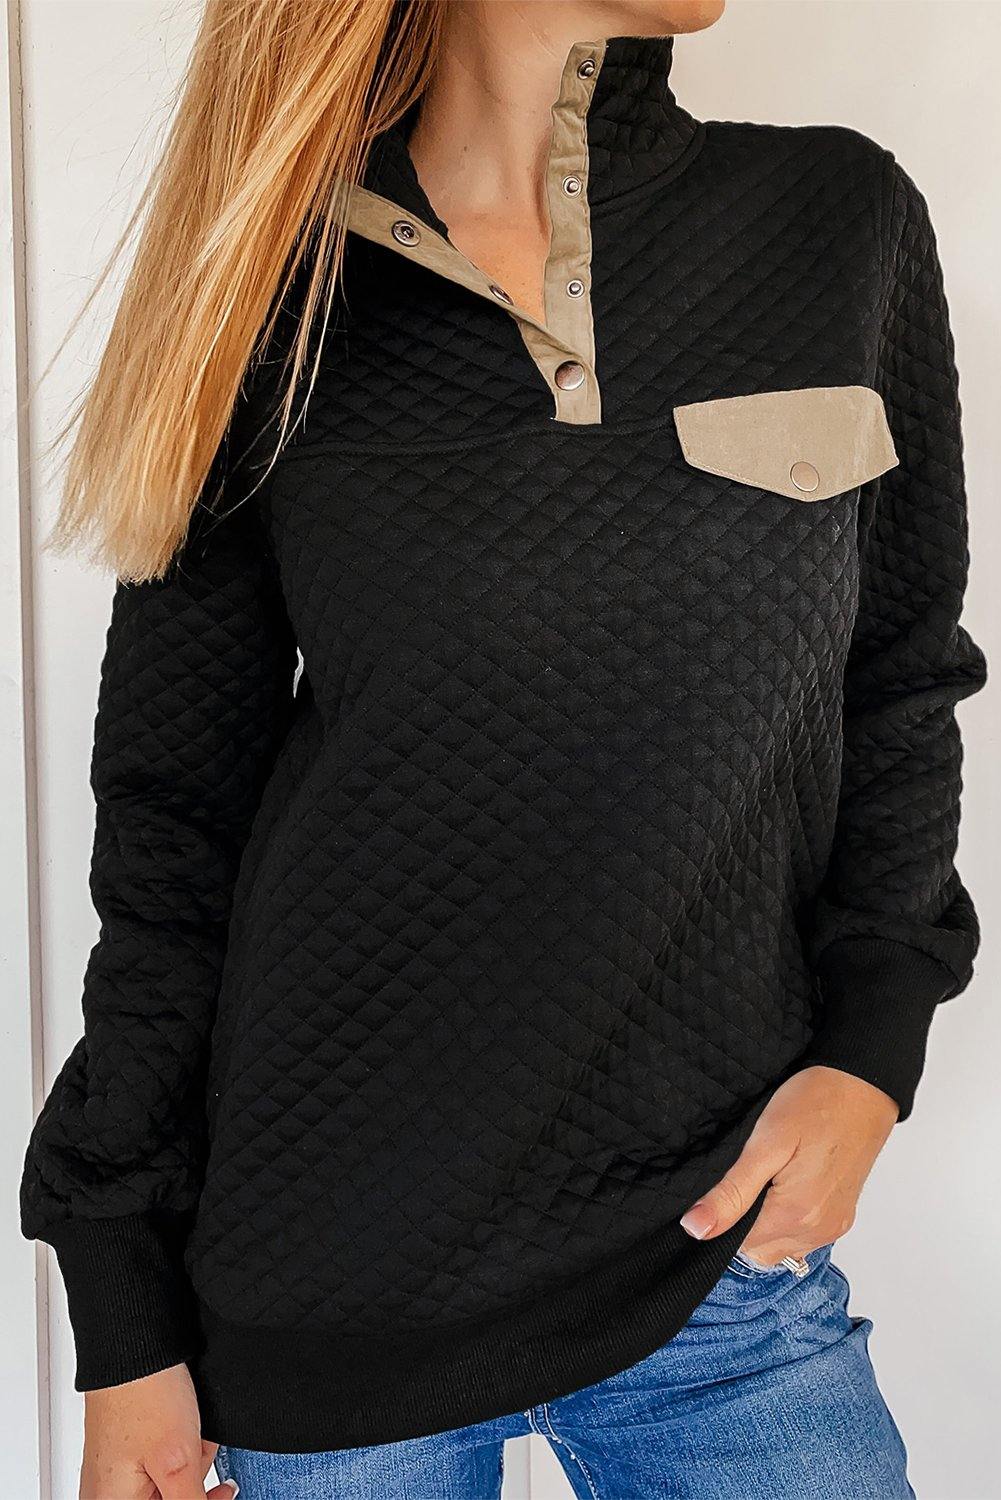 Dark Gray Quilted Snaps Stand Neck Sweatshirt with Fake Front Pocket - L & M Kee, LLC